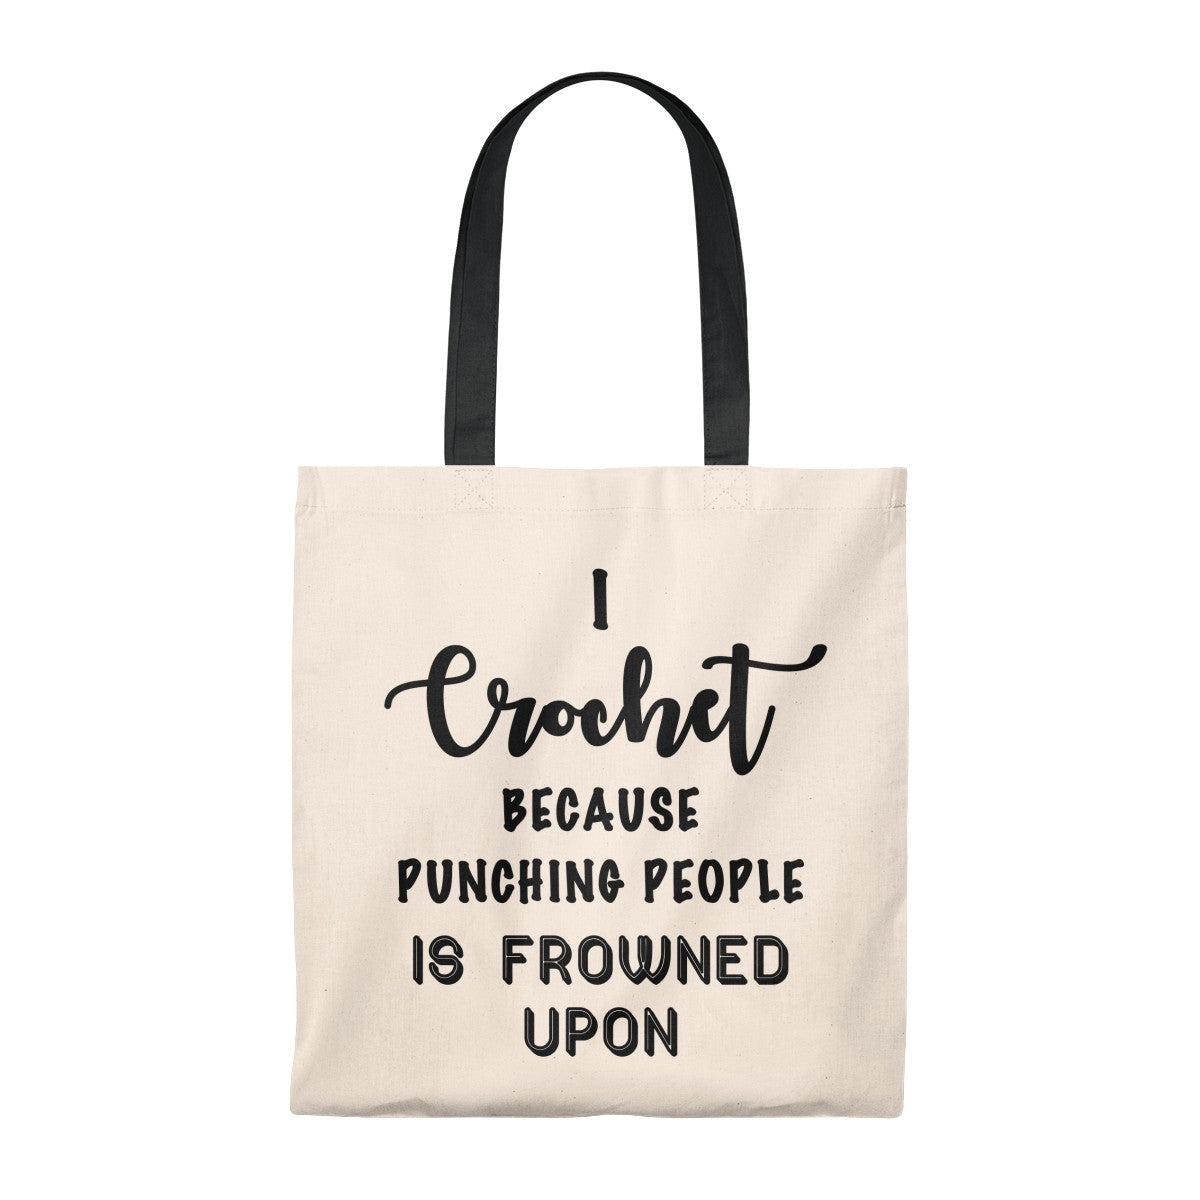 “I Crochet Because Punching People Is Frowned Upon” - Tote Bag - Vintage